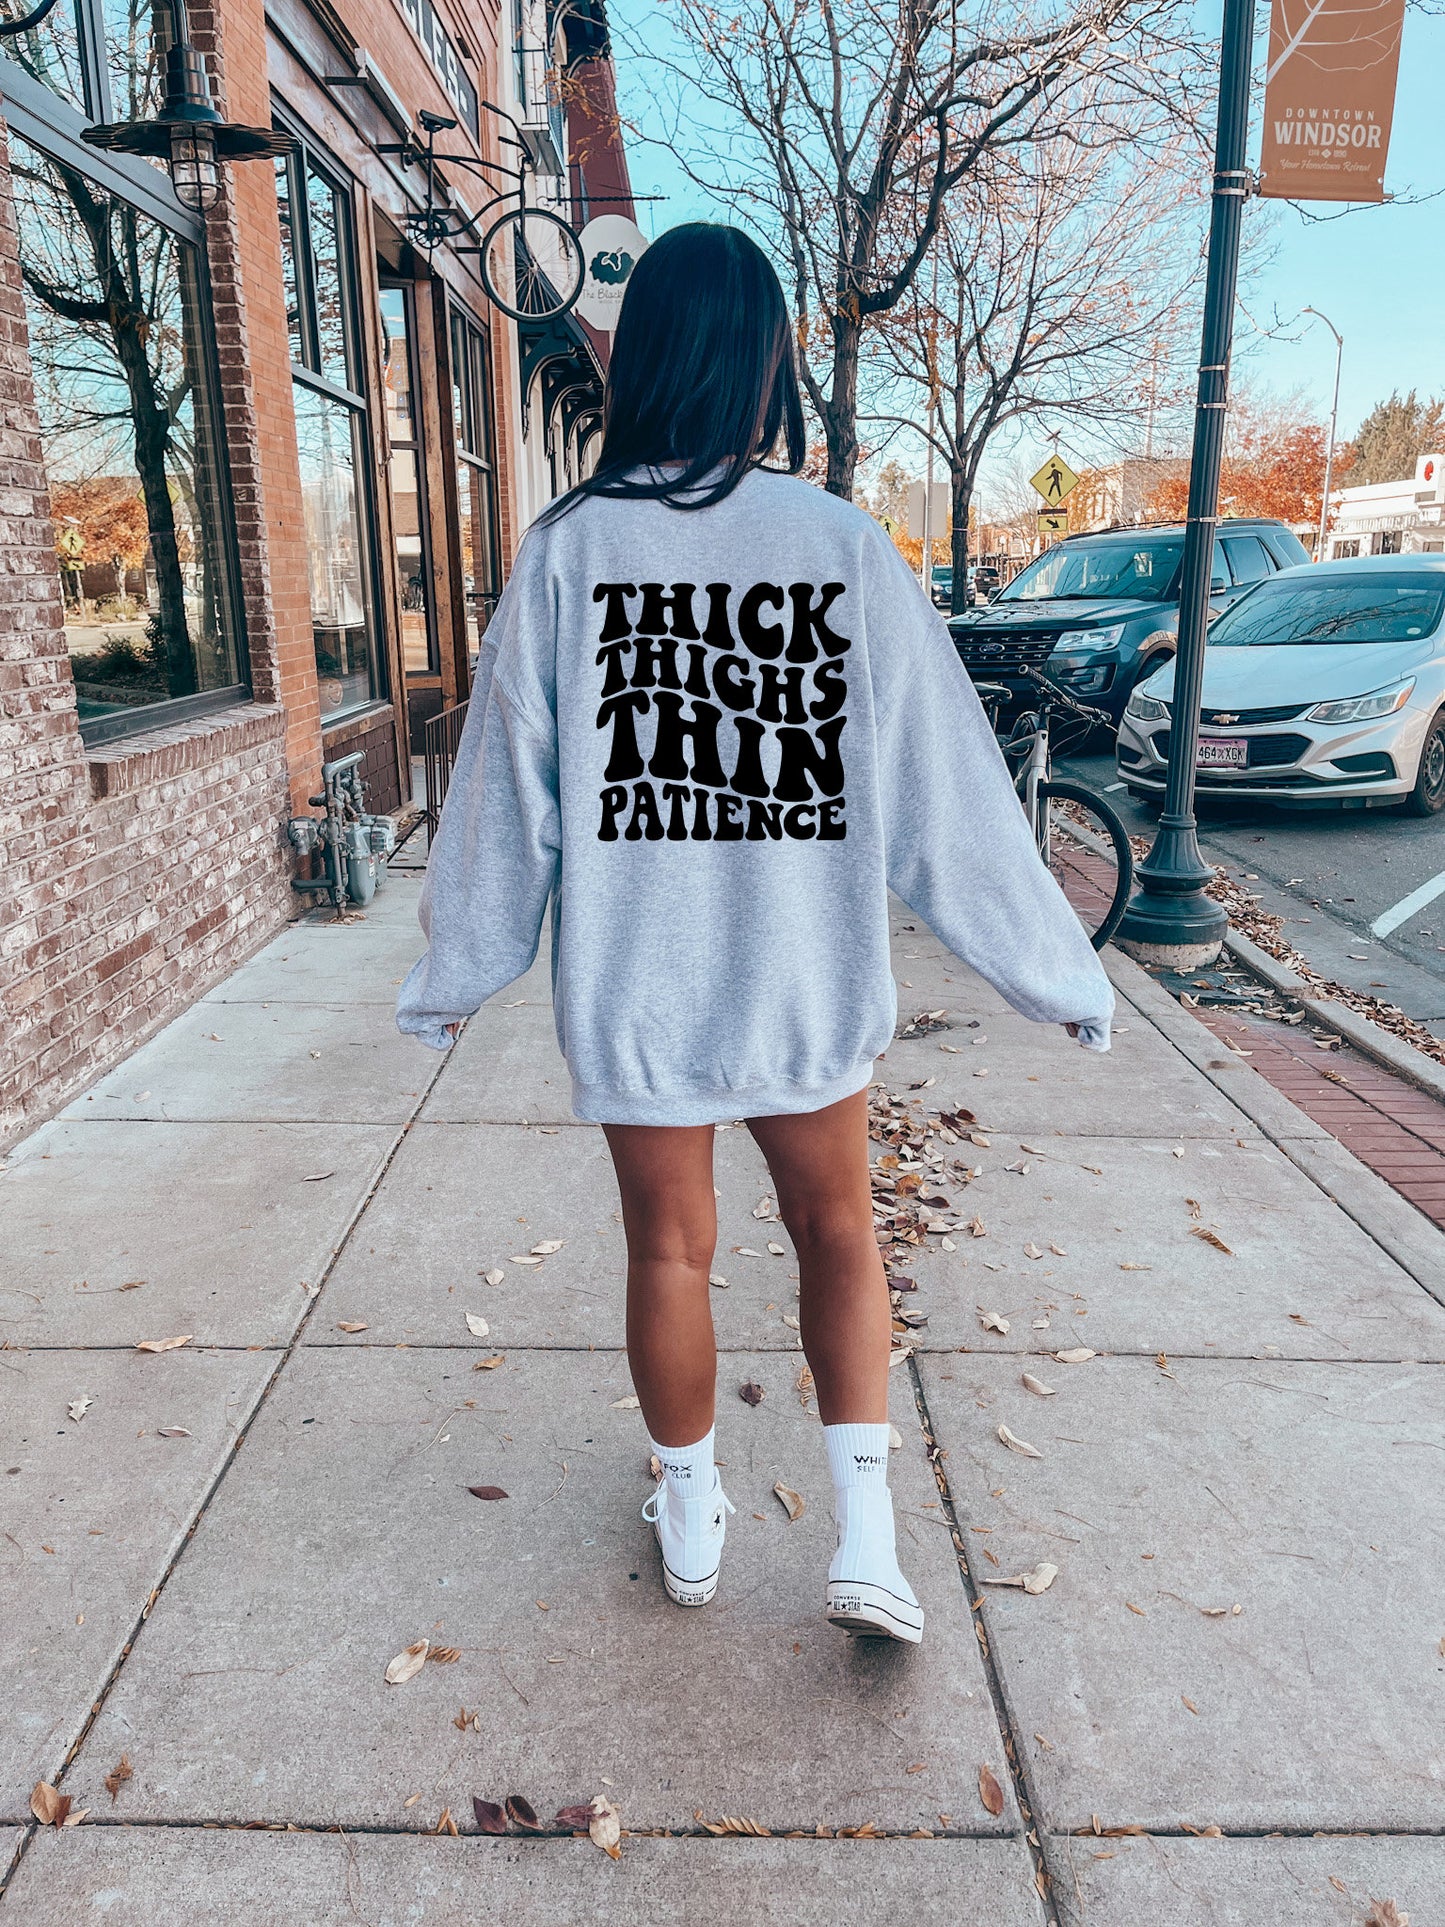 Thick Thighs Thin Patience Sweatshirt - Thick Thighs Sweatshirt - Thin Patience Sweatshirt - Womens Thick Thighs Thin Patience Sweater